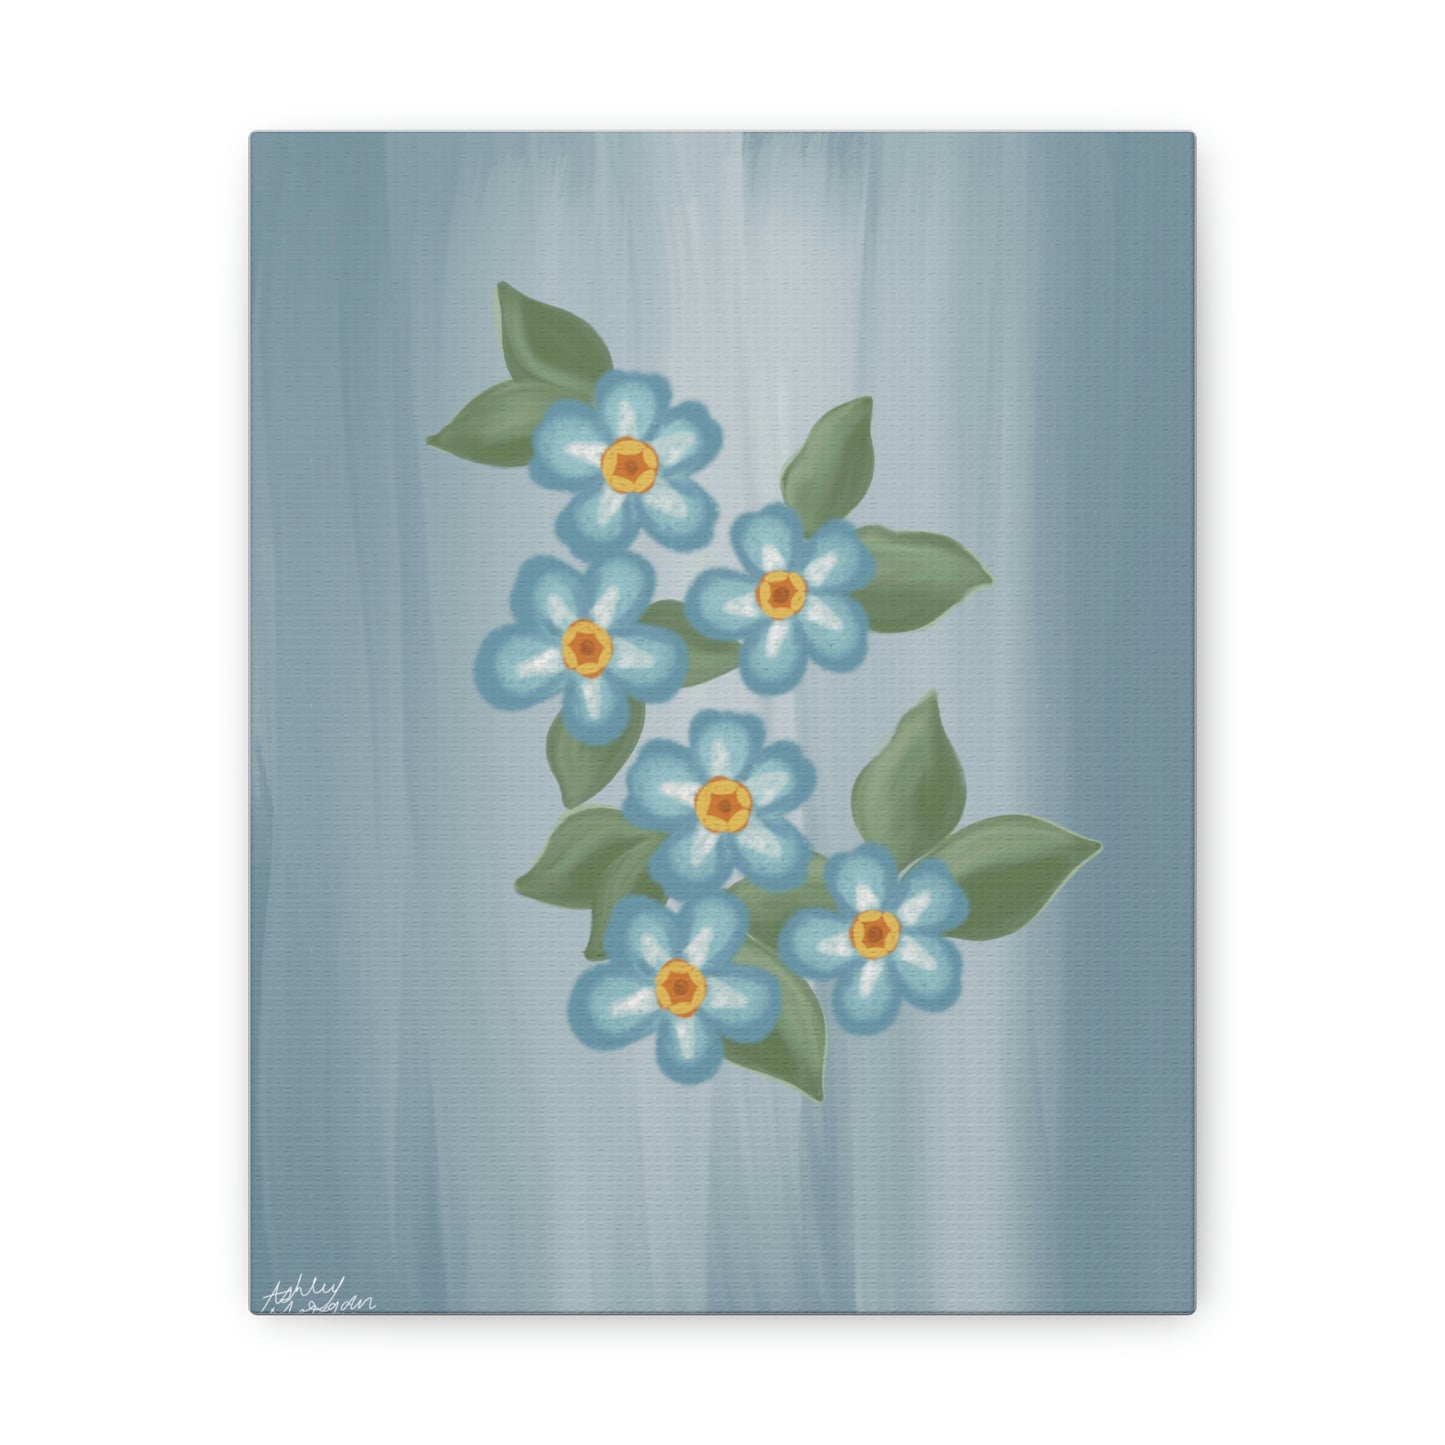 Forget Me Not Wildflower Canvas Wrap